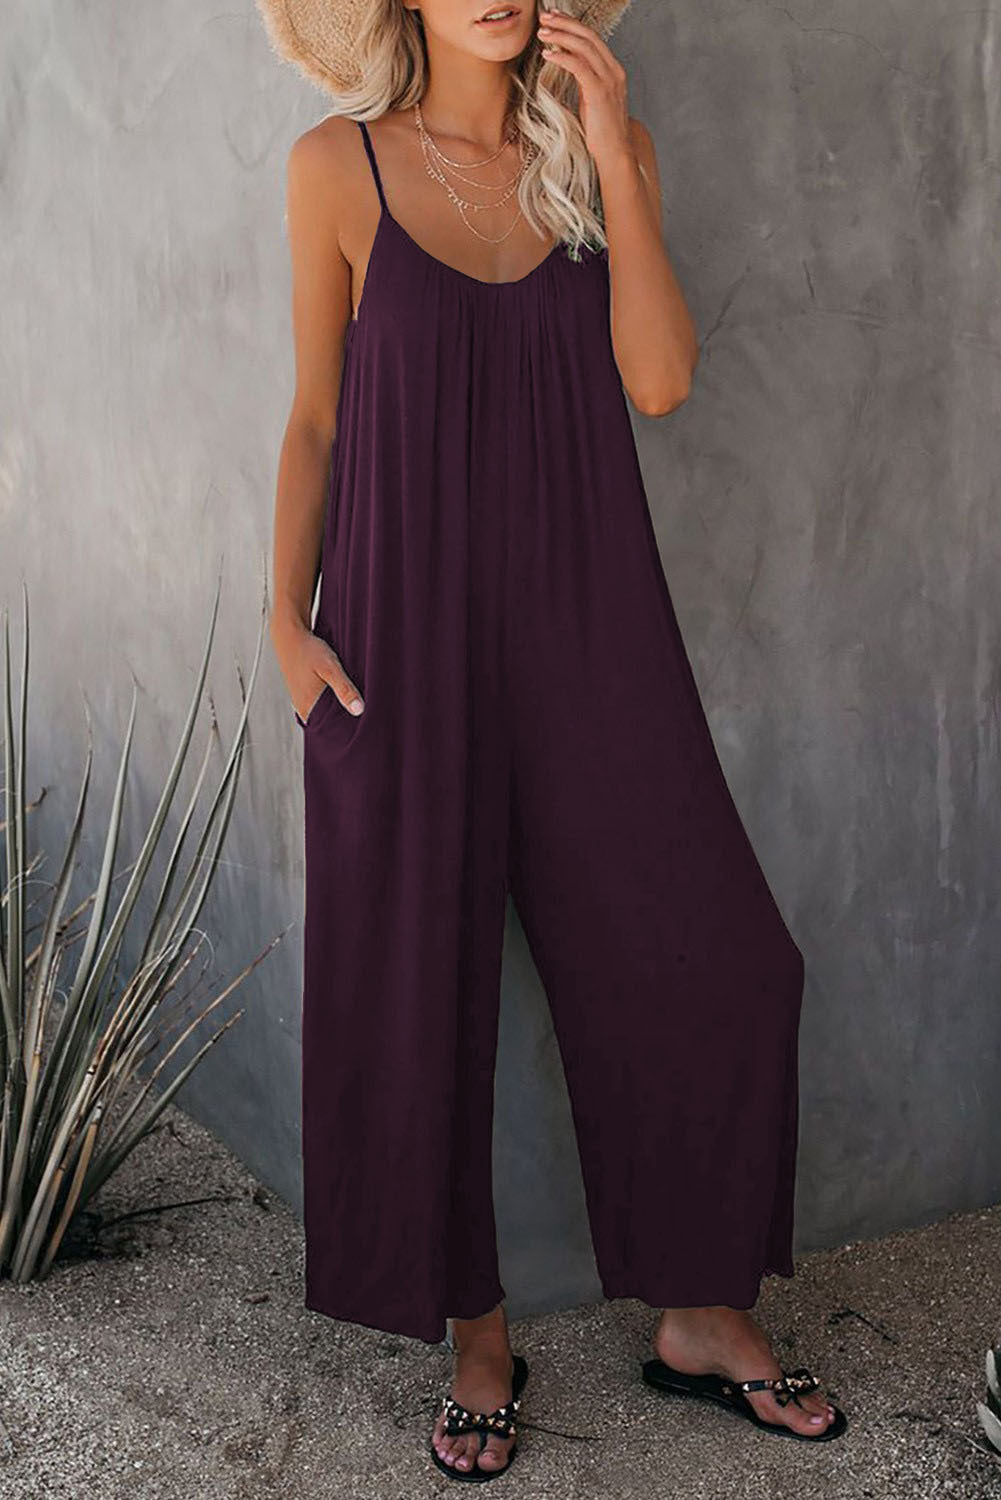 WOMEN'S LOOSE SLEEVELESS JUMPSUITS ROMPER WITH POCKETS